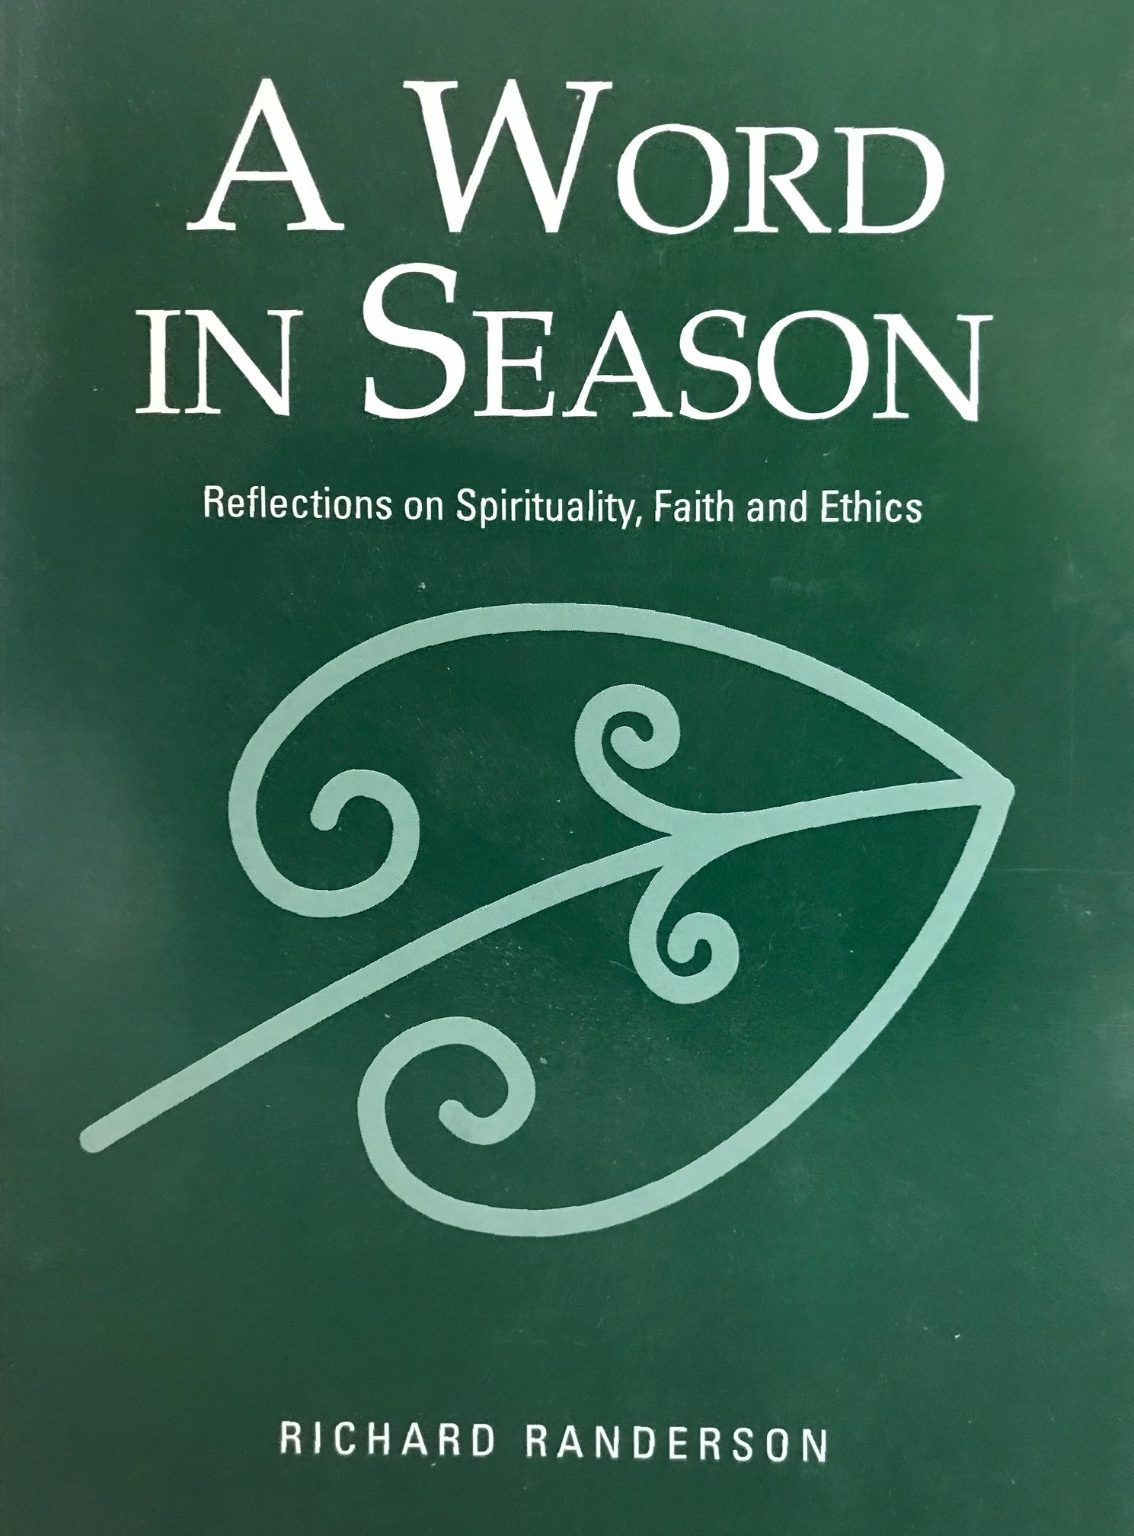 A WORD IN SEASON: Reflections On Spirituality, Faith and Ethics